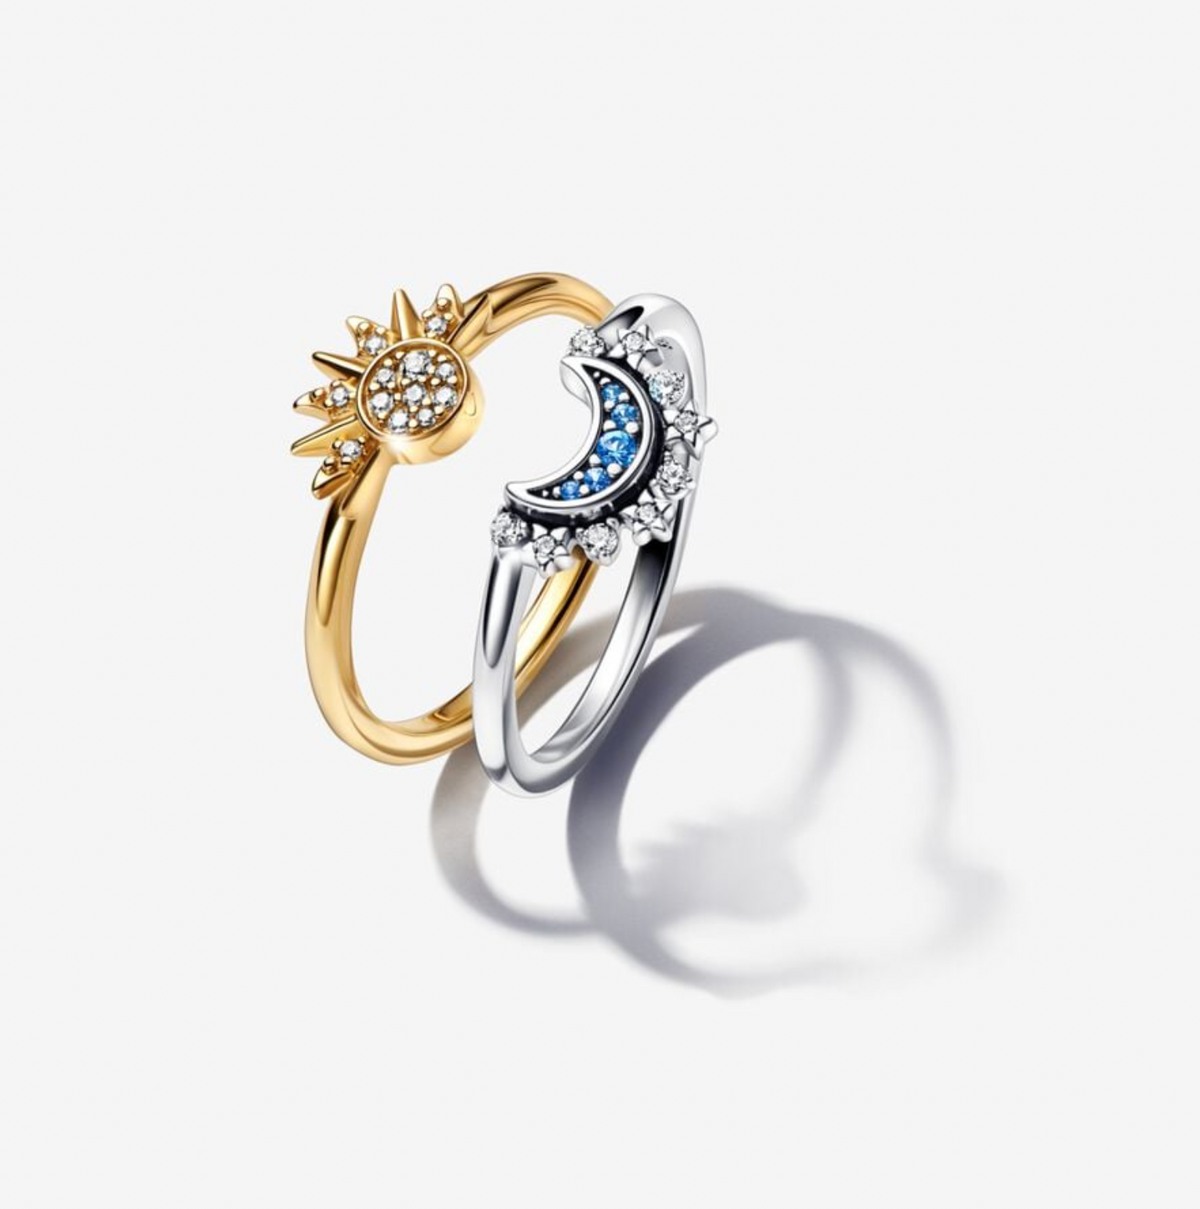 Celestial rings Sun and Moon for best friends